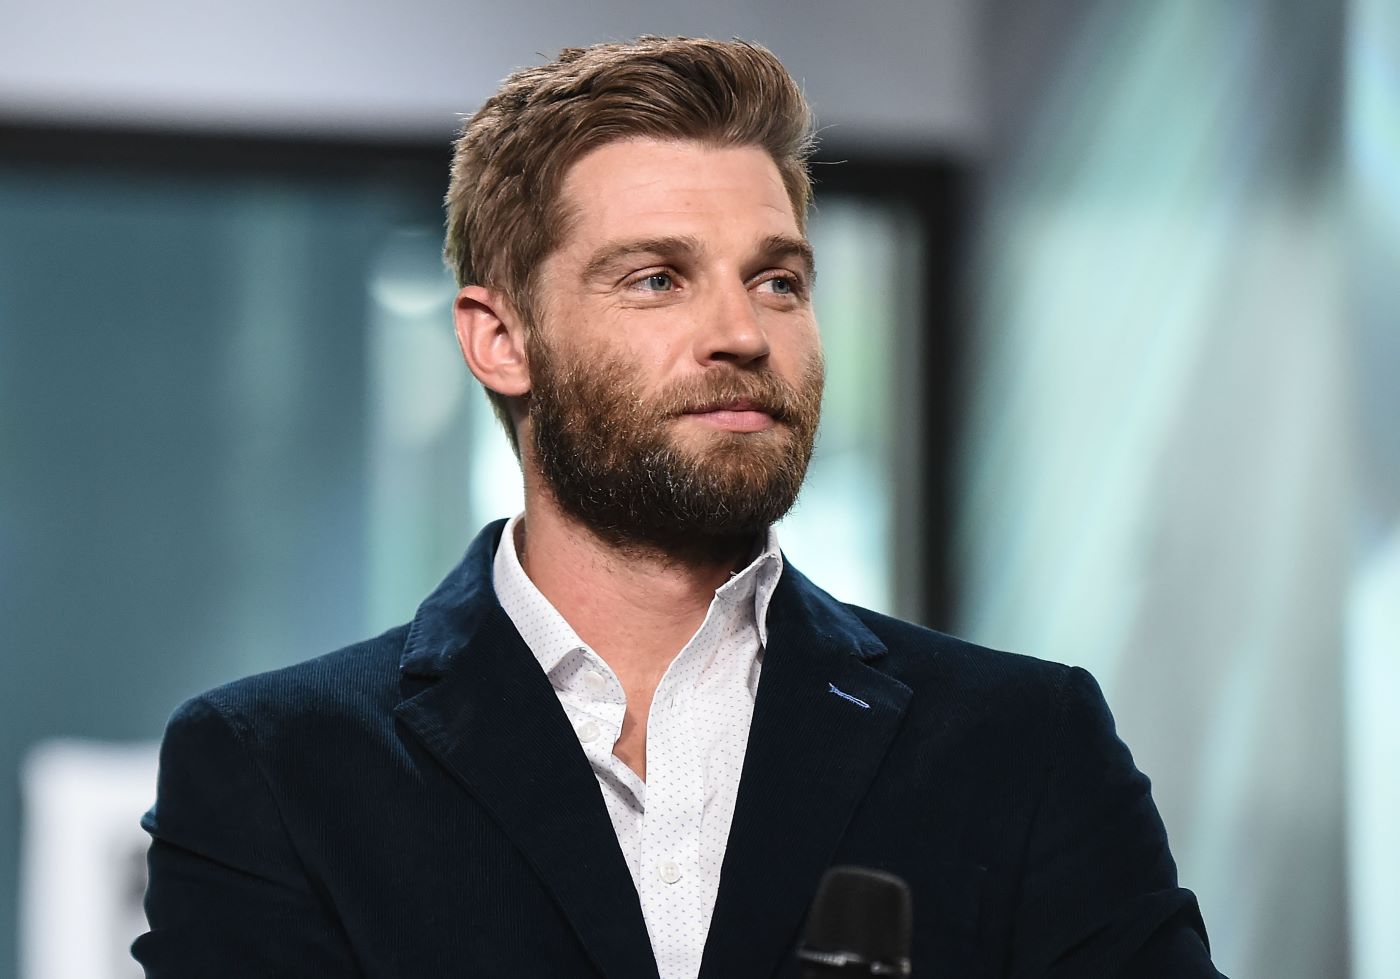 Mike Vogel in front of a blurred background wearing a black suit jacket and a white button up shirt.